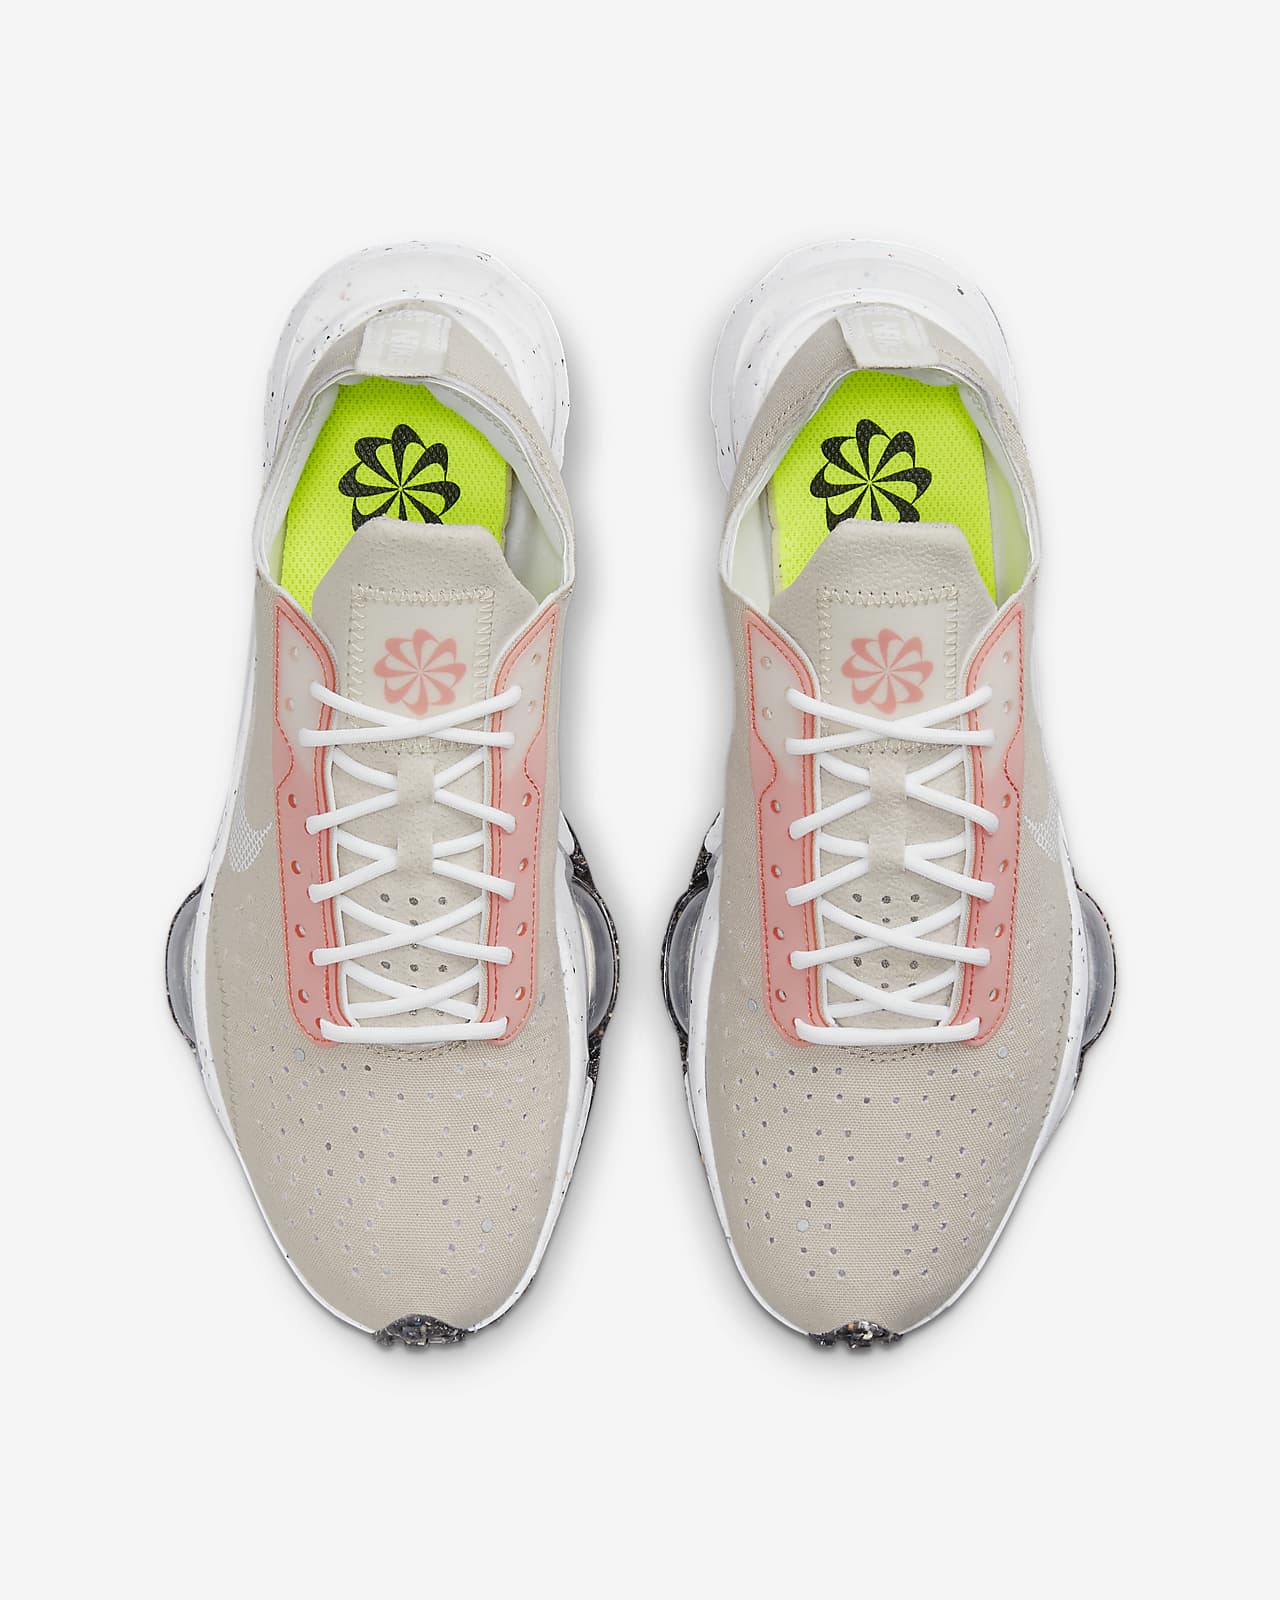 George Eliot pellizco Tregua Nike Air Zoom-Type Crater Women's Shoes. Nike.com